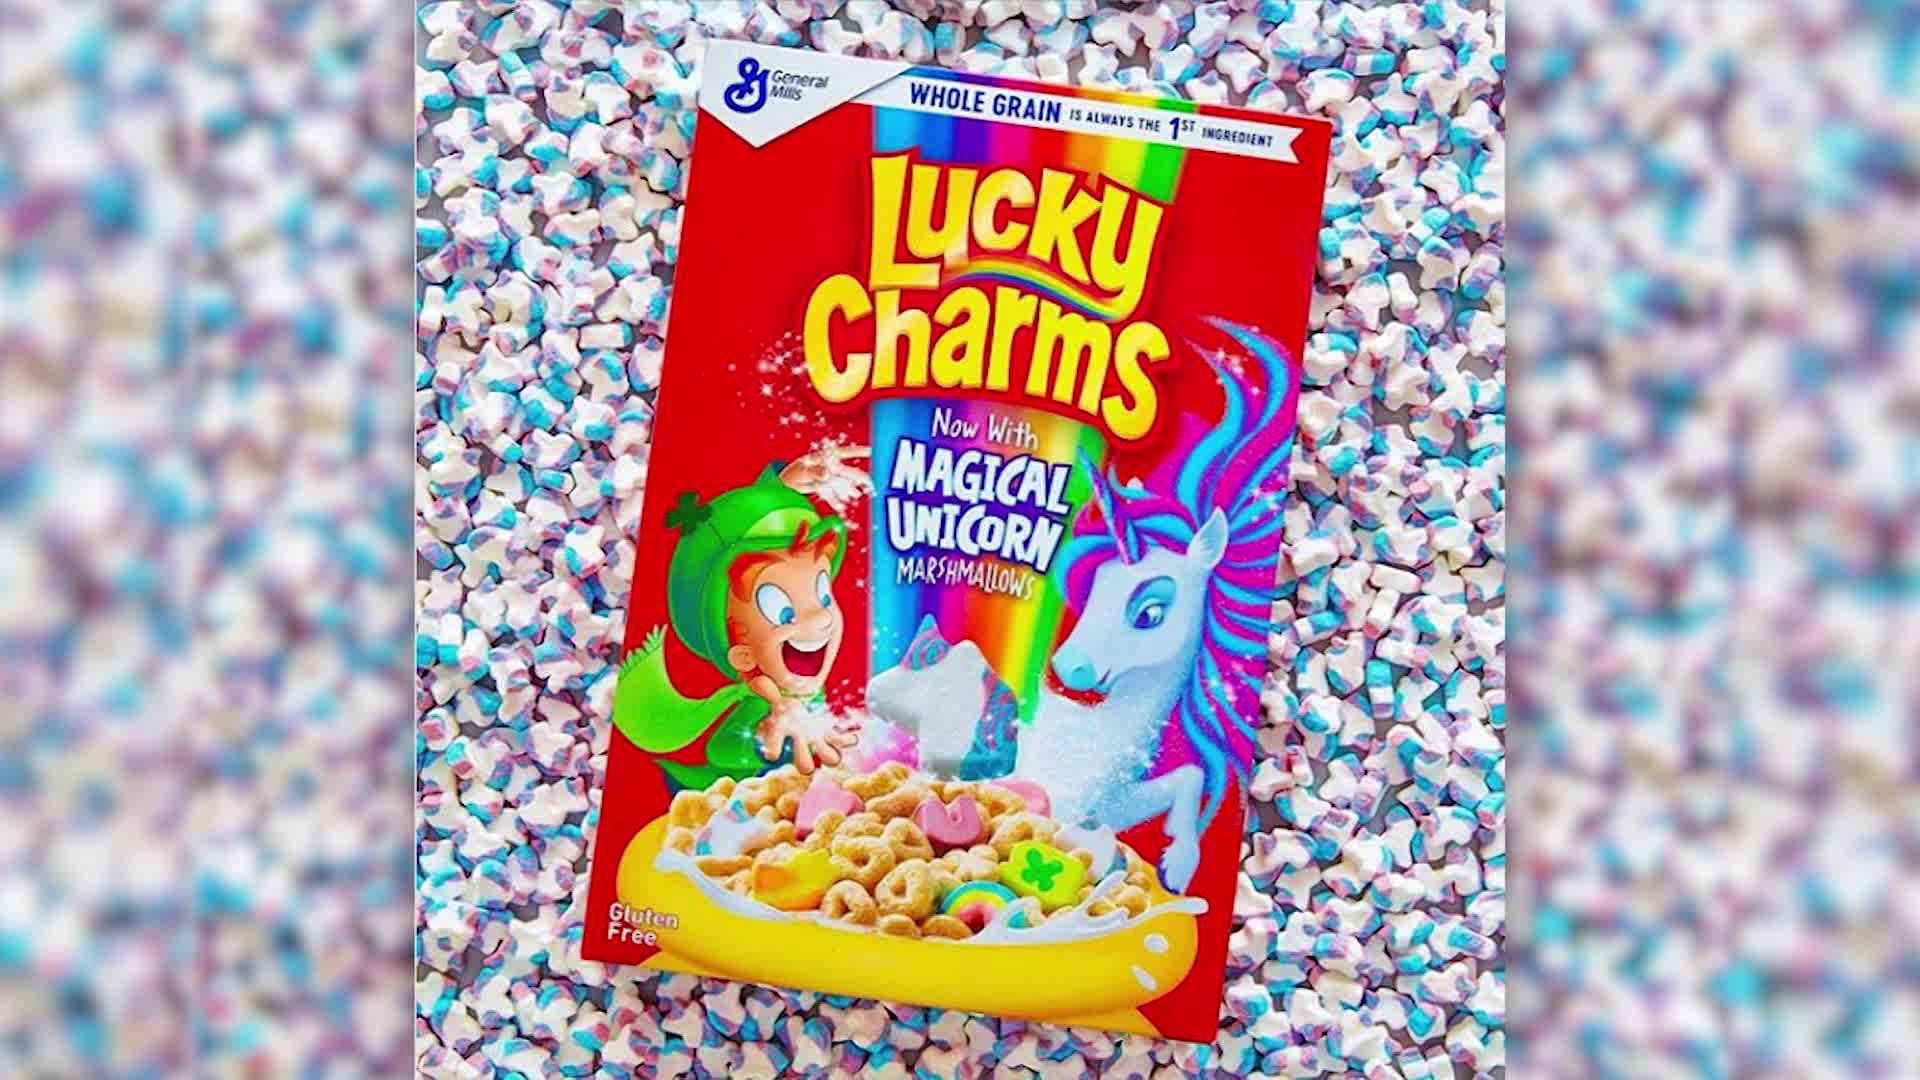 Lucky Charms is retiring one of its marshmallows to add a unicorn